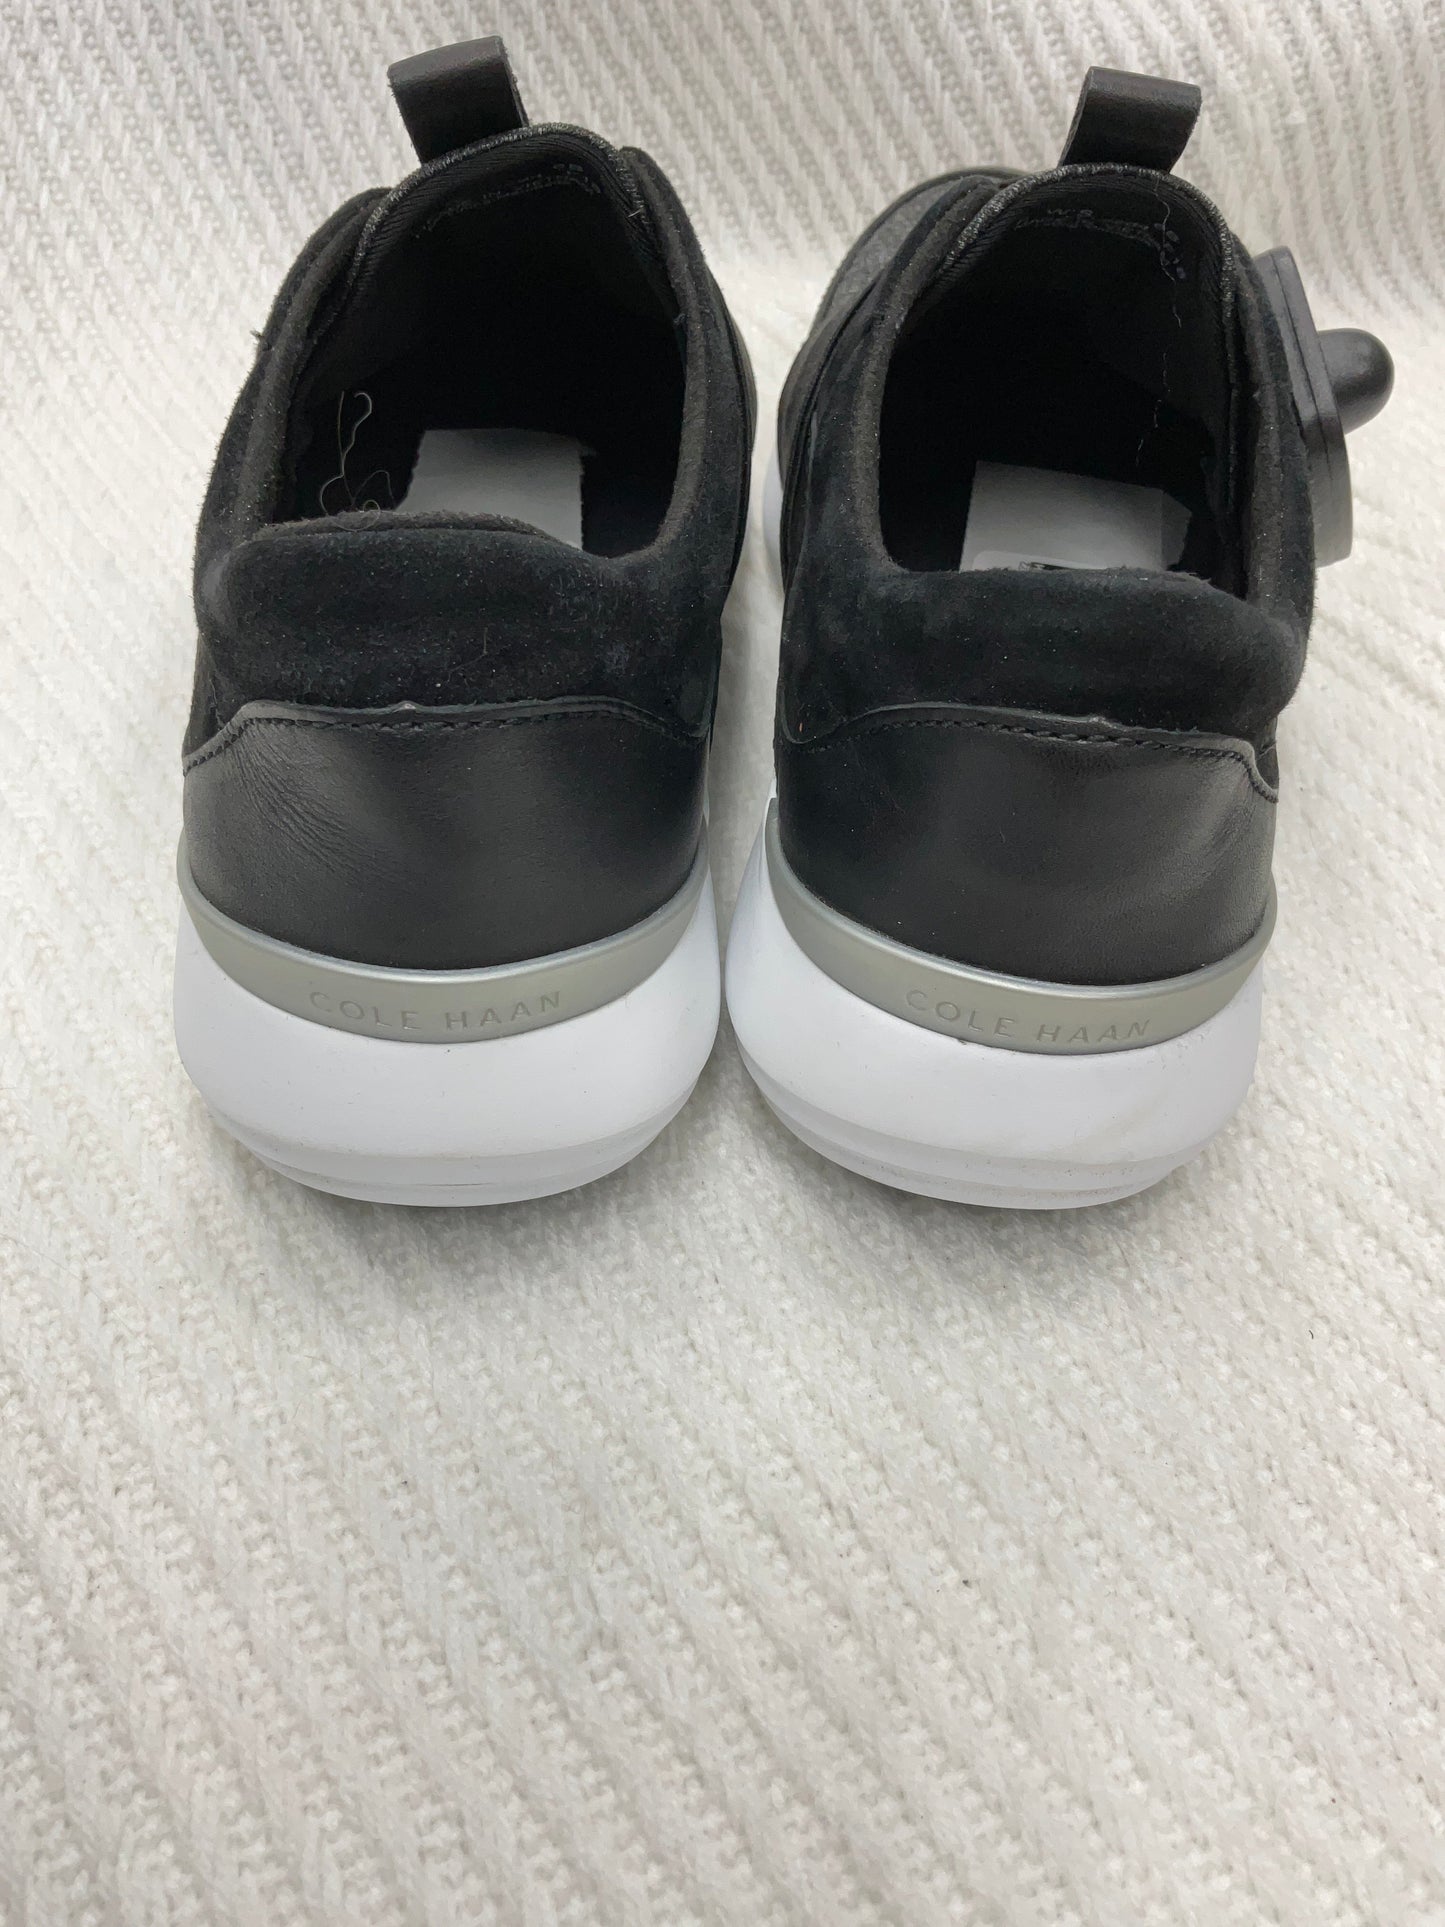 Shoes Designer By Cole-haan  Size: 6